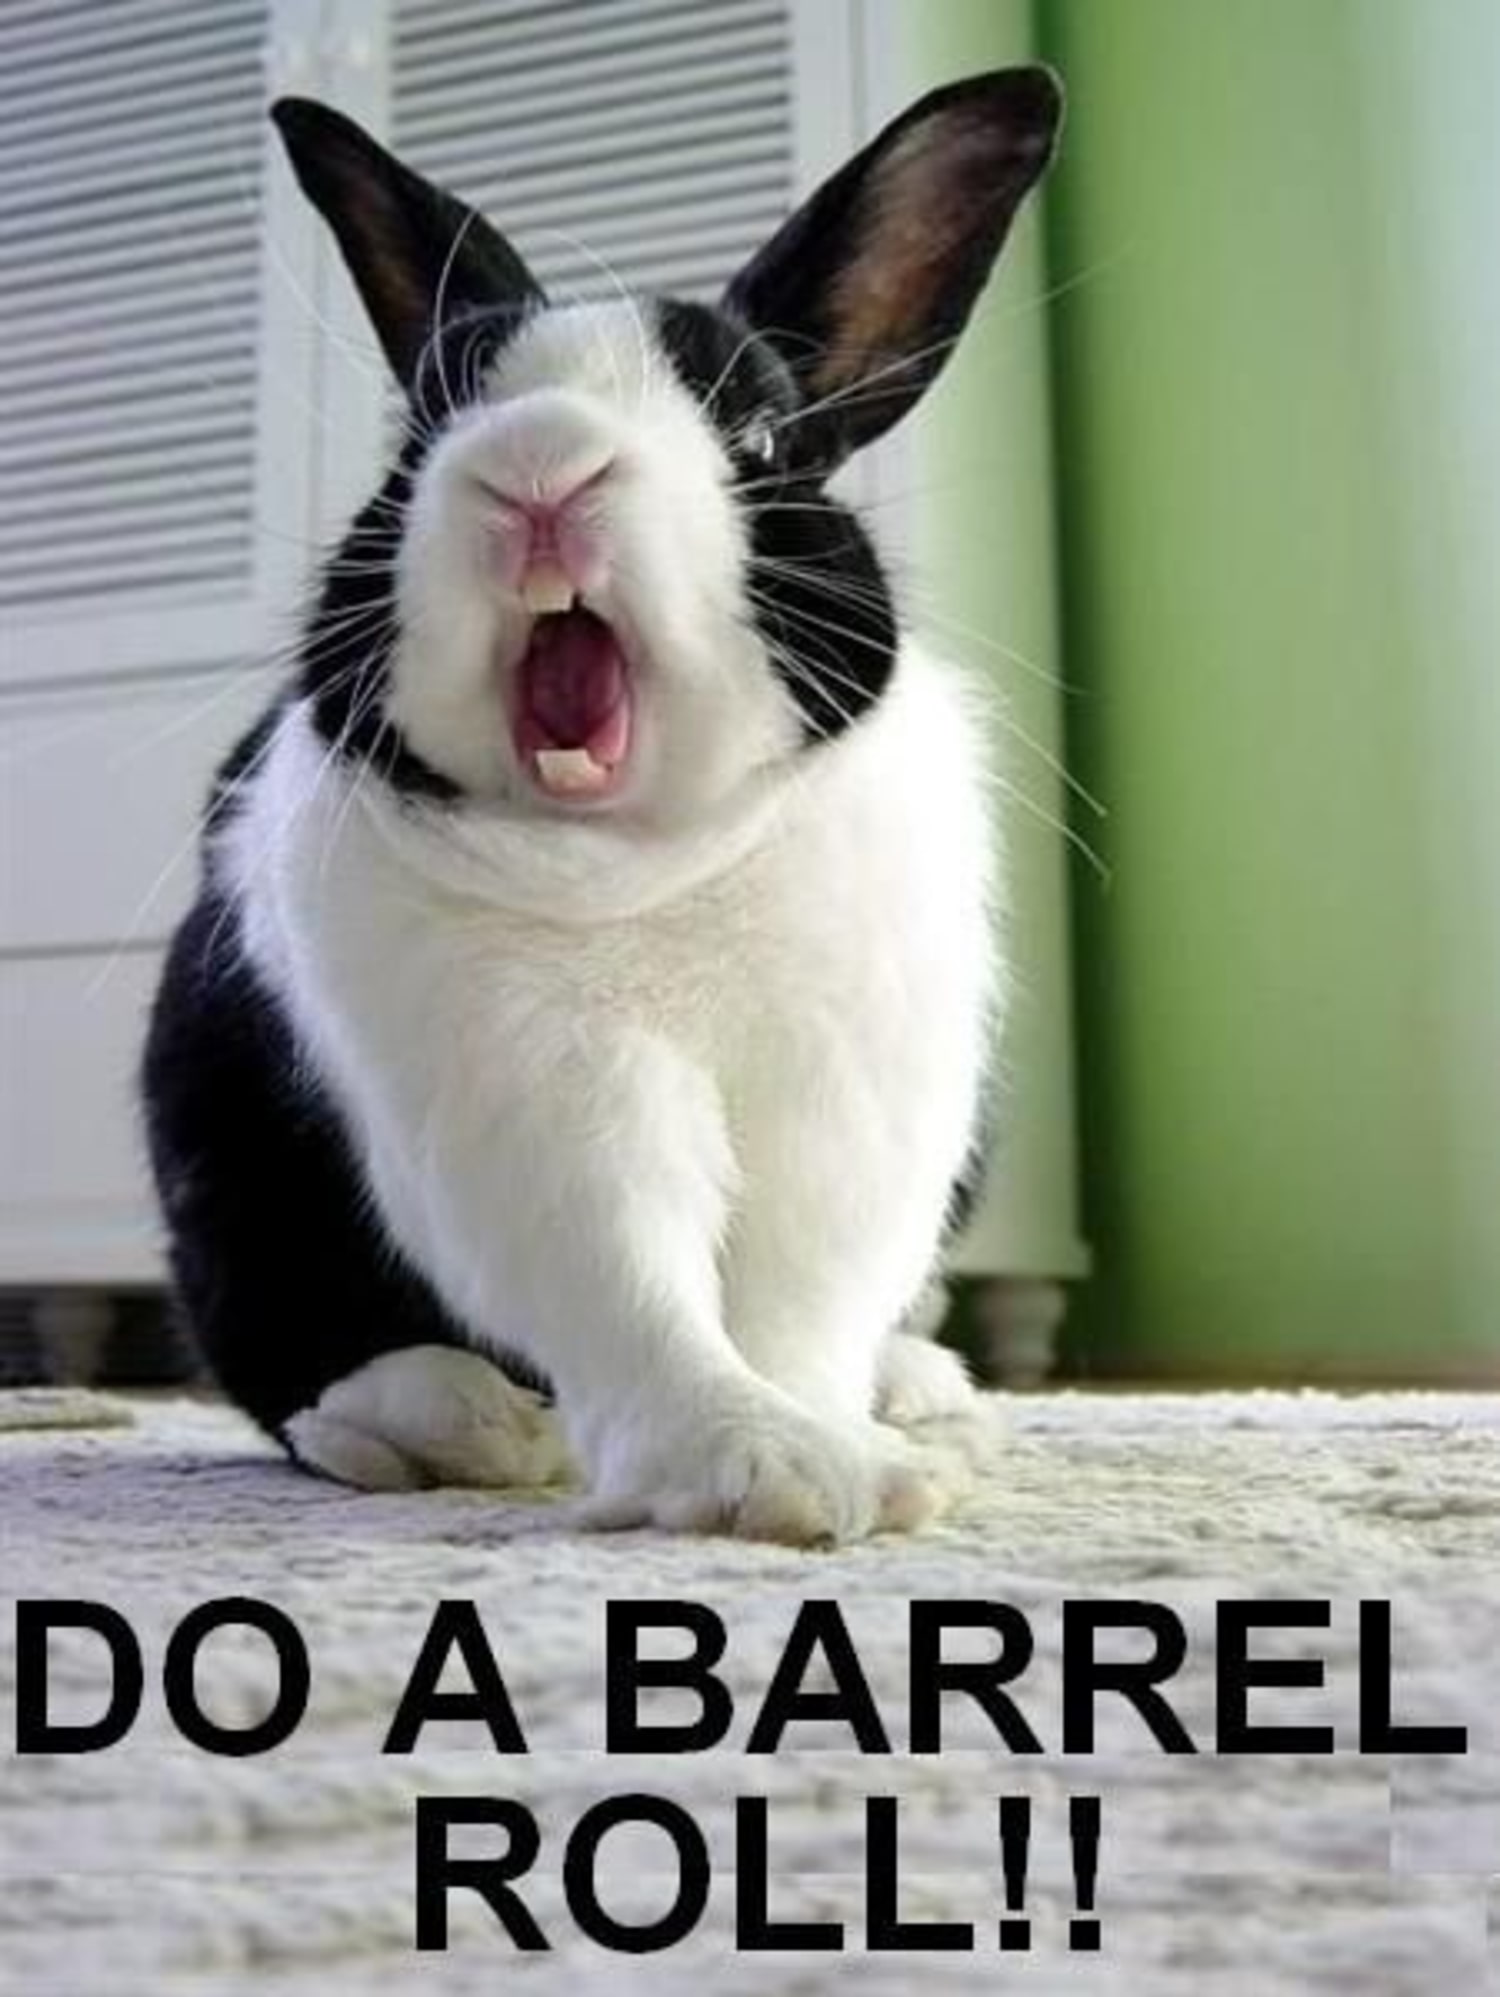 Do a barrel roll trick. It's wonderful when it comes to web